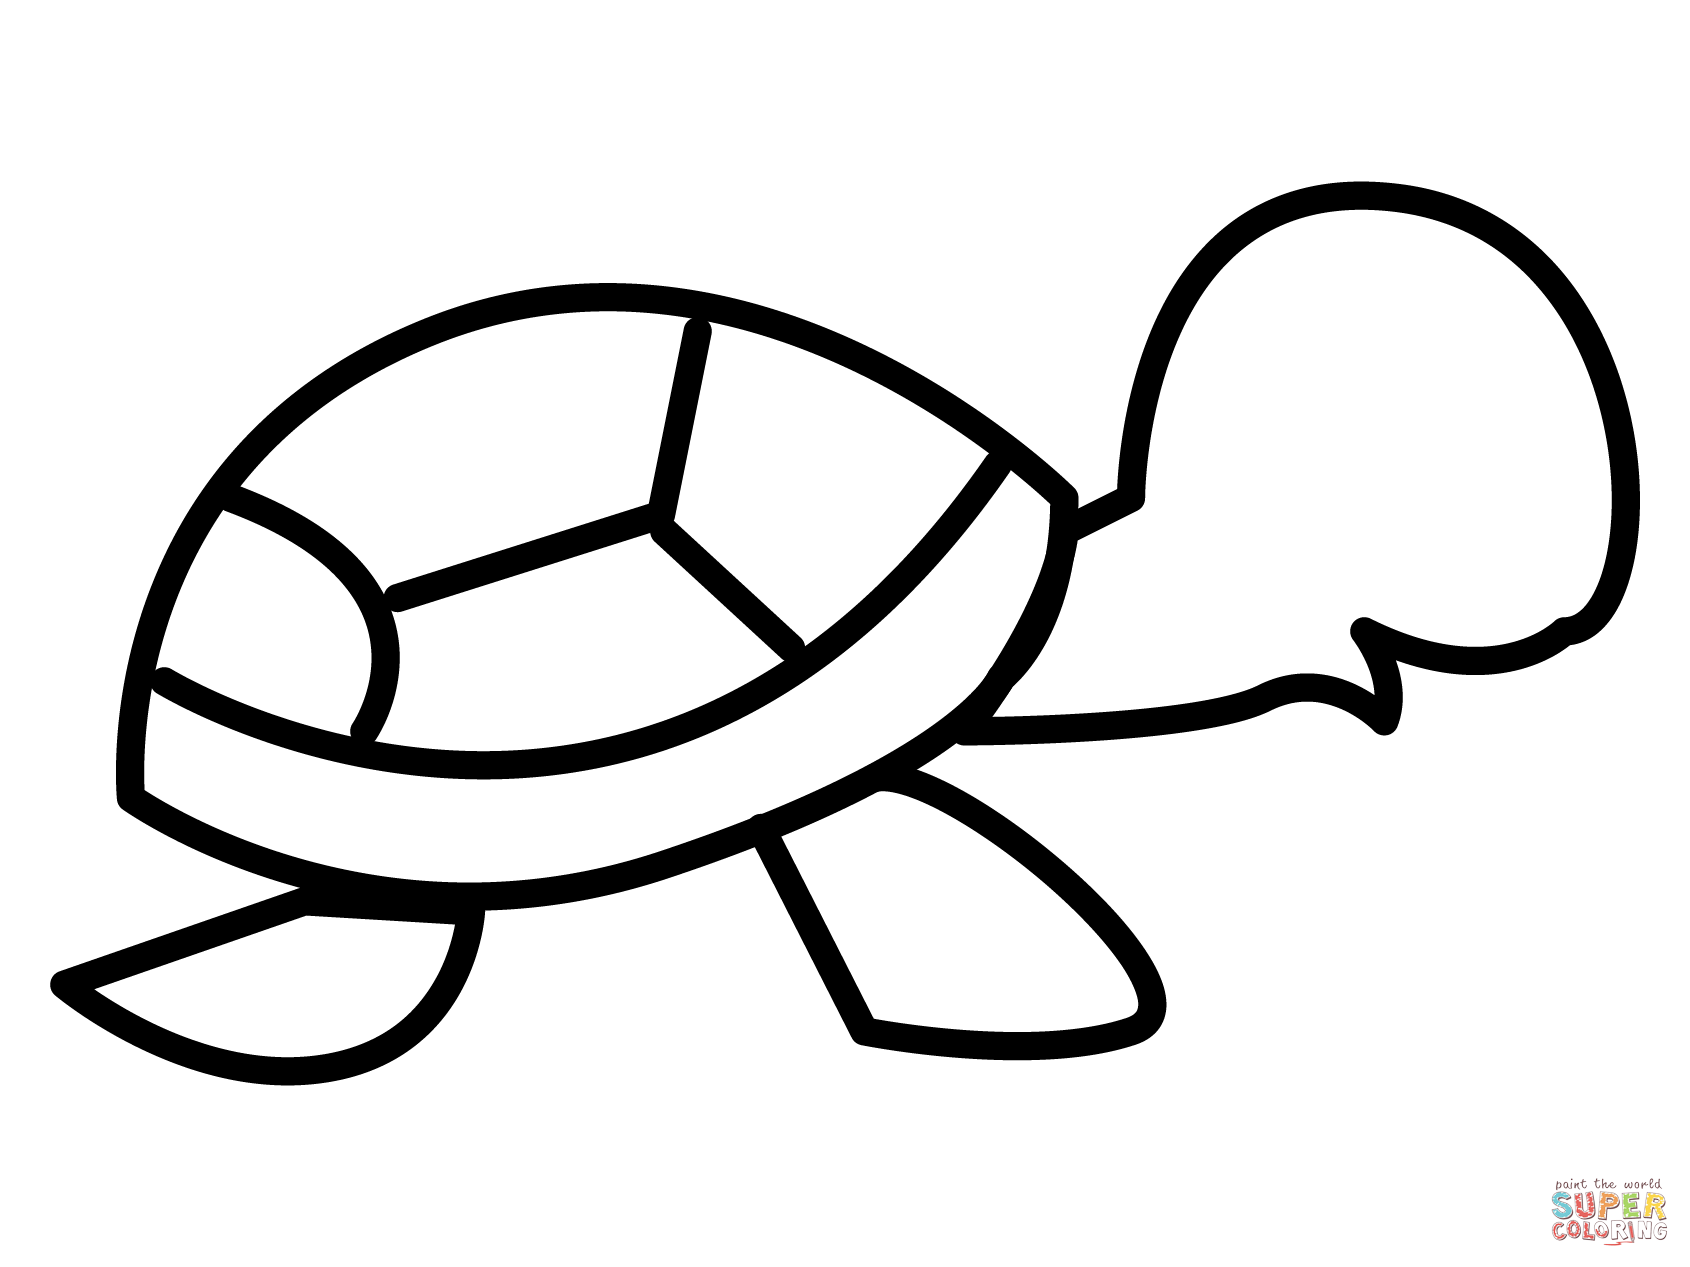 Turtle emoji coloring page free printable coloring pages